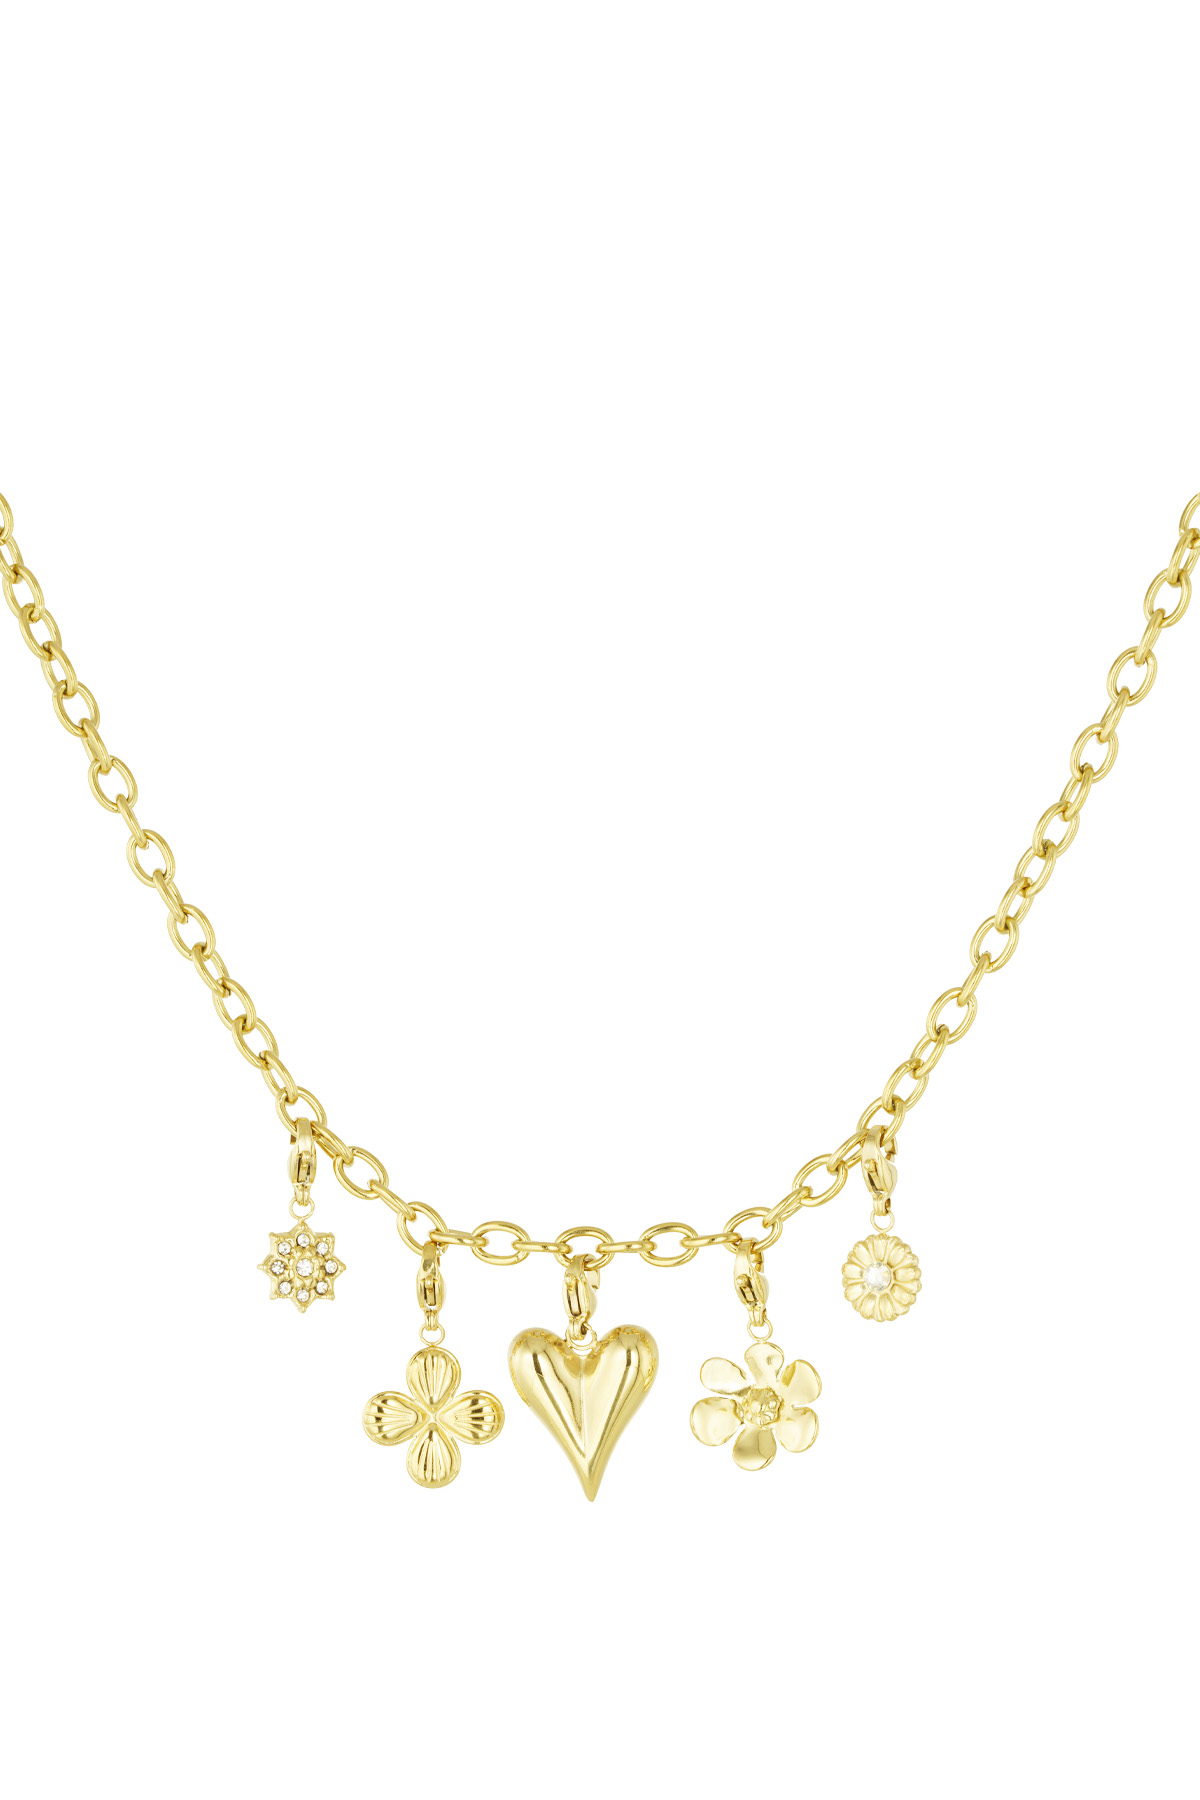 Bedelketting charming daily - goud